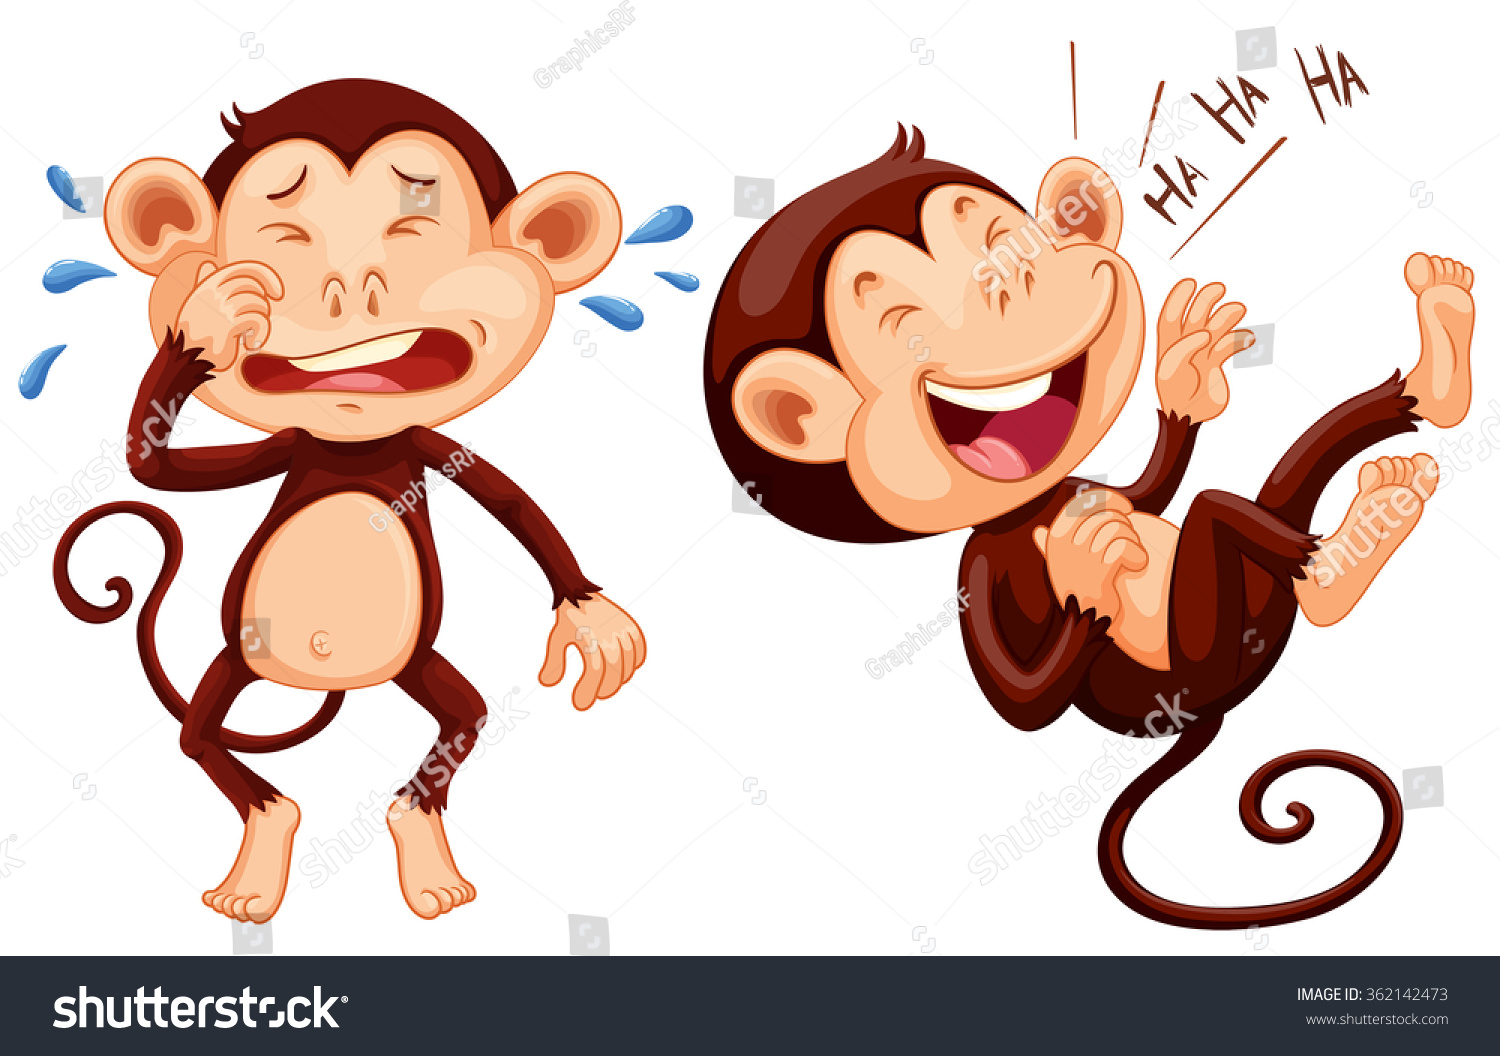 clipart laughing animals - photo #24